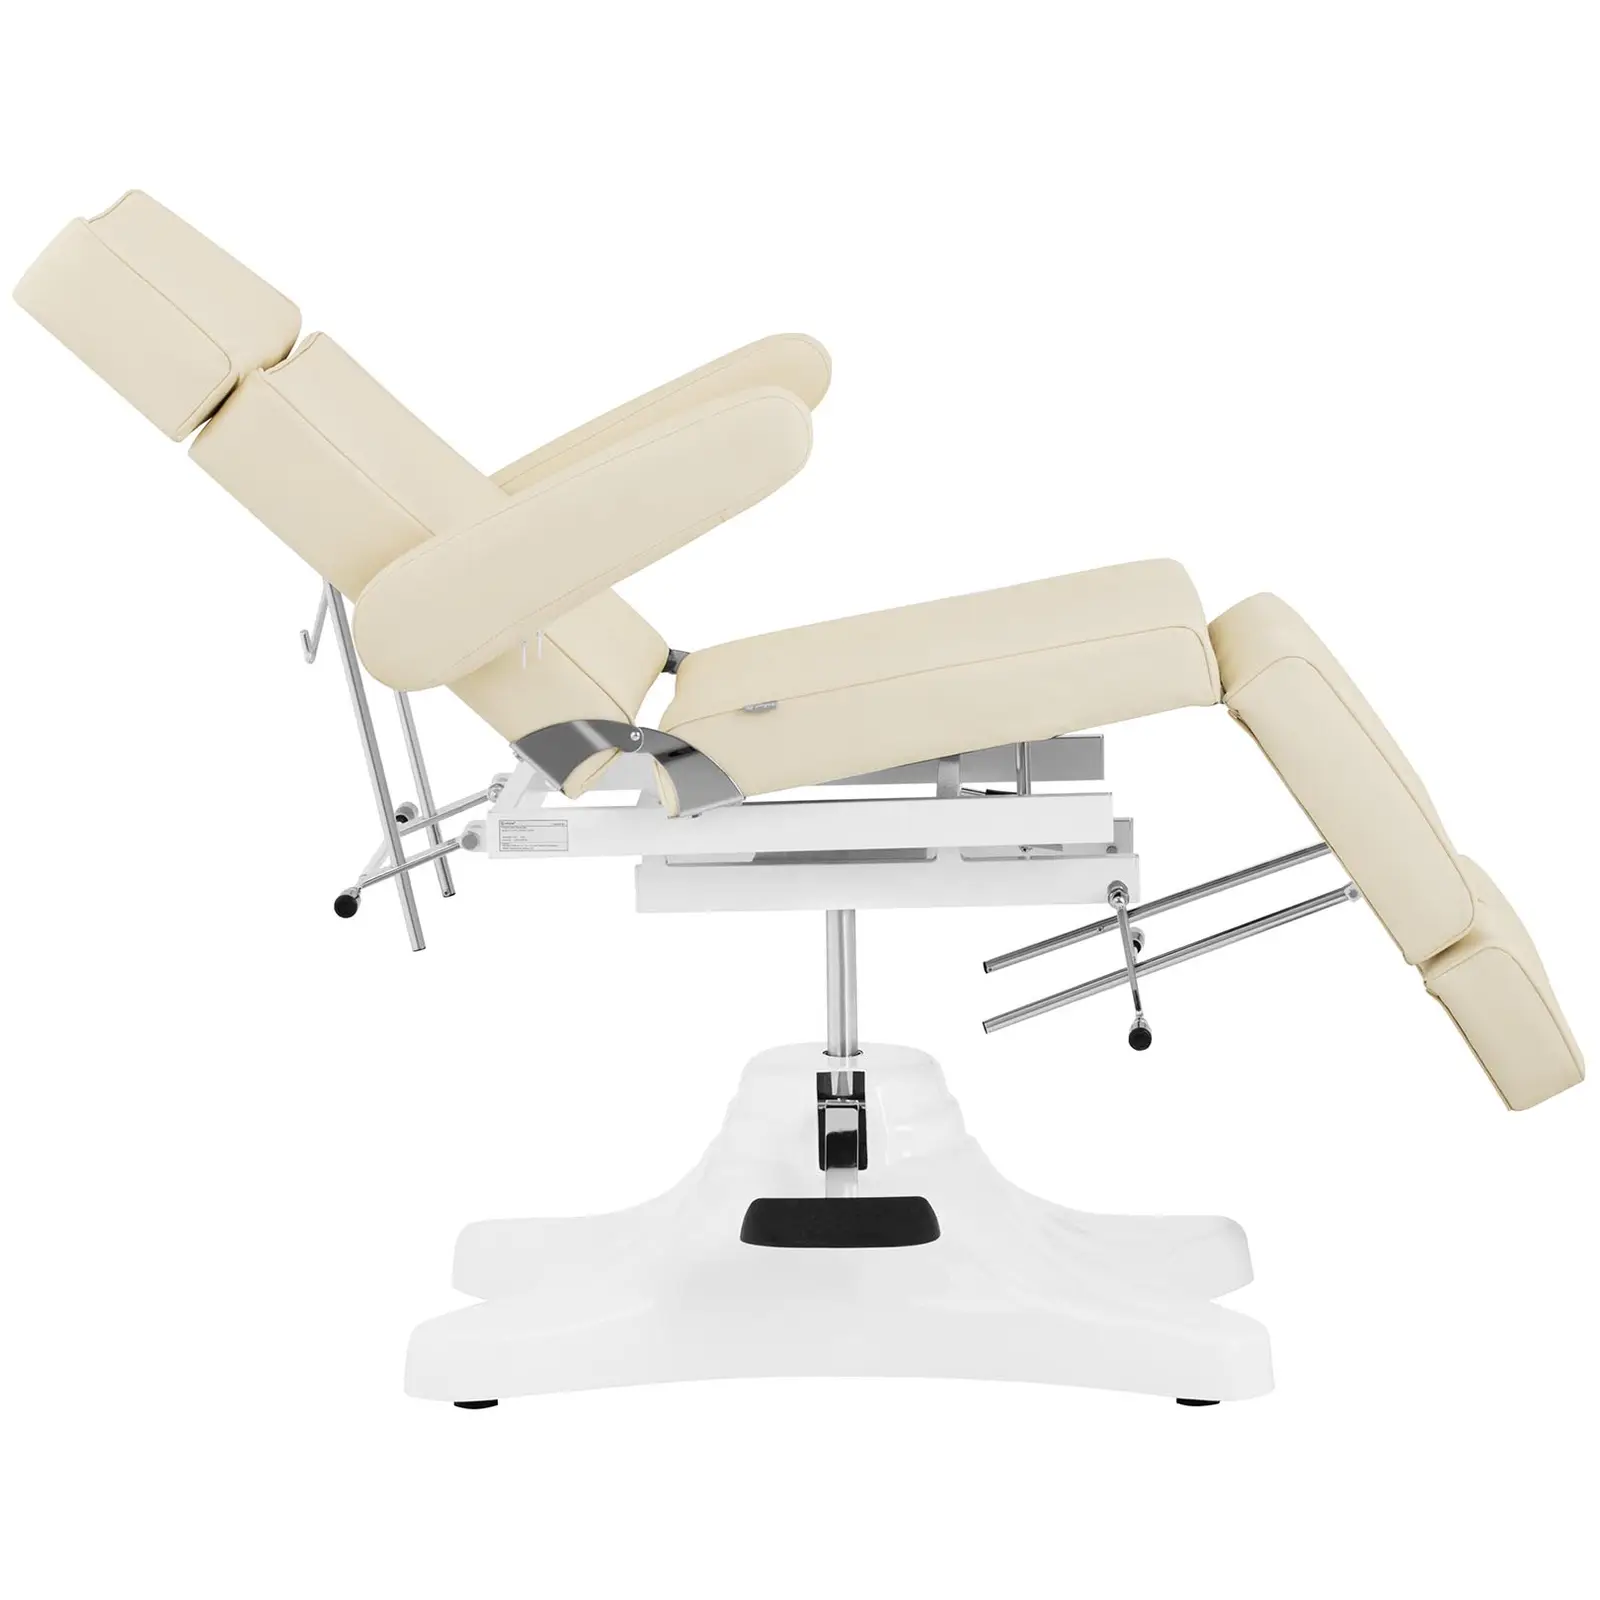 Foot care chair & rolling stool with backrest - beige